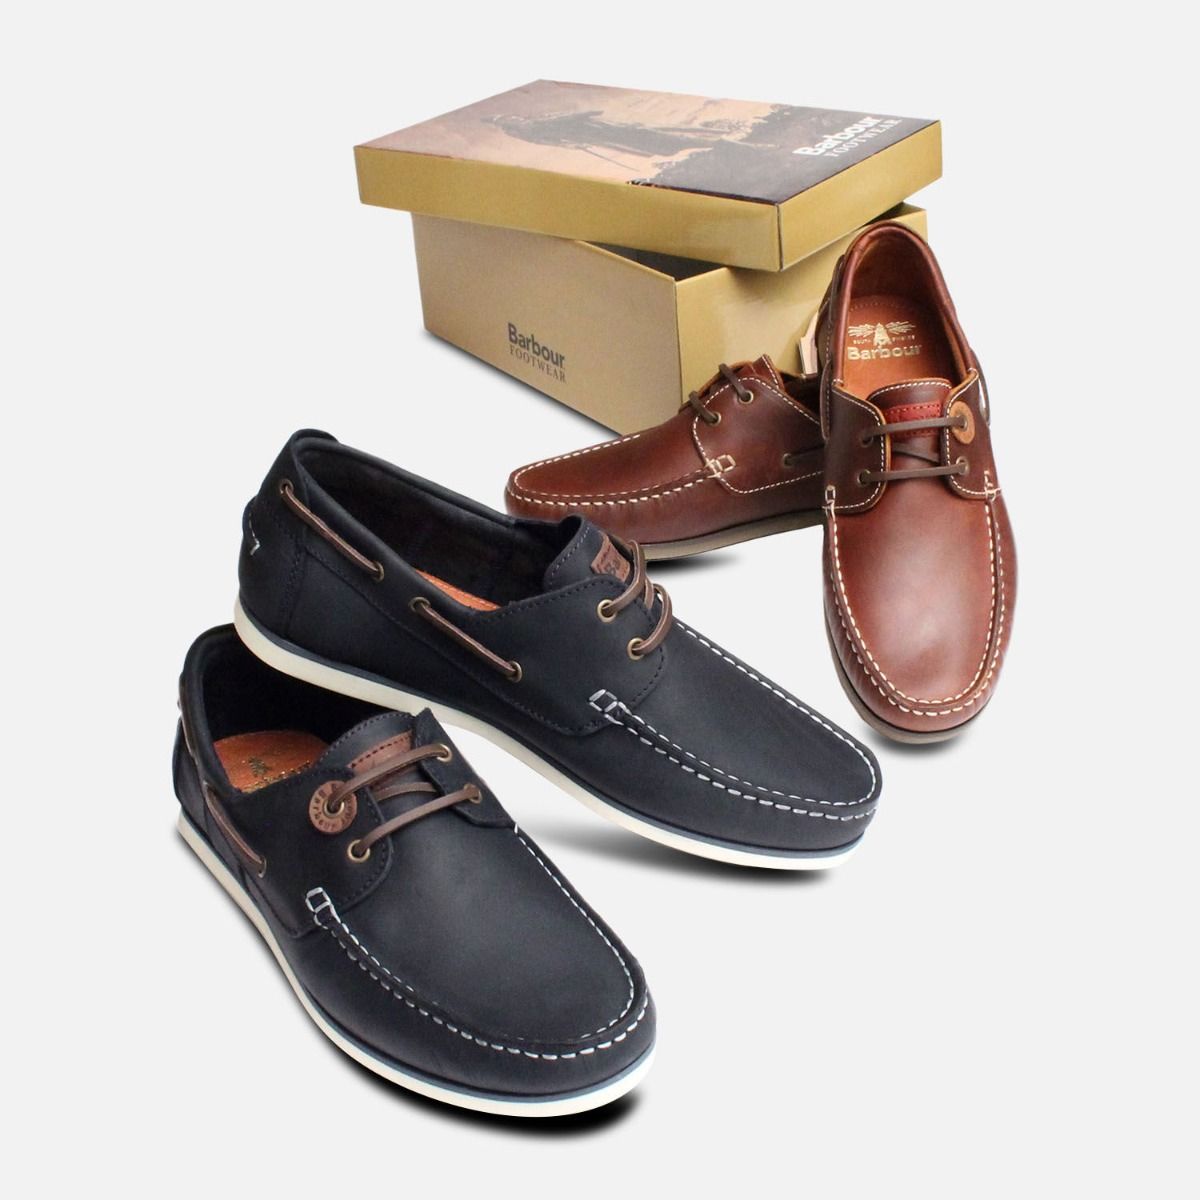 barbour capstan boat shoes mahogany